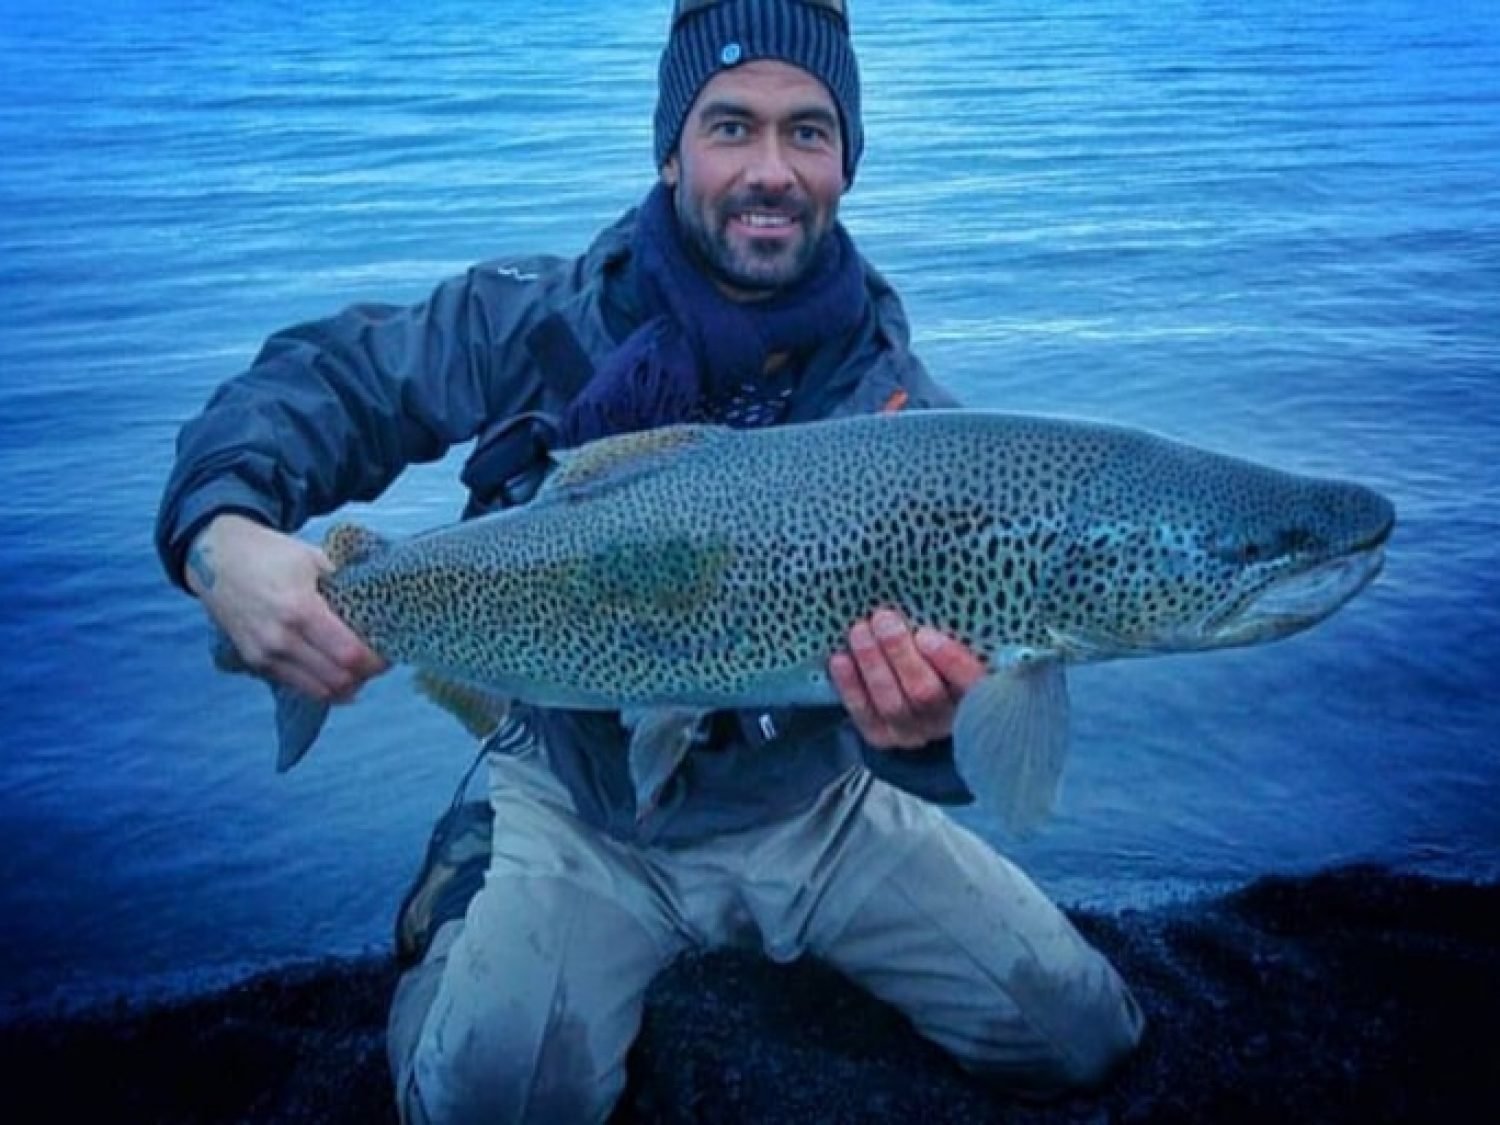 Experience the thrill of salmon fishing with guide Sigurjon